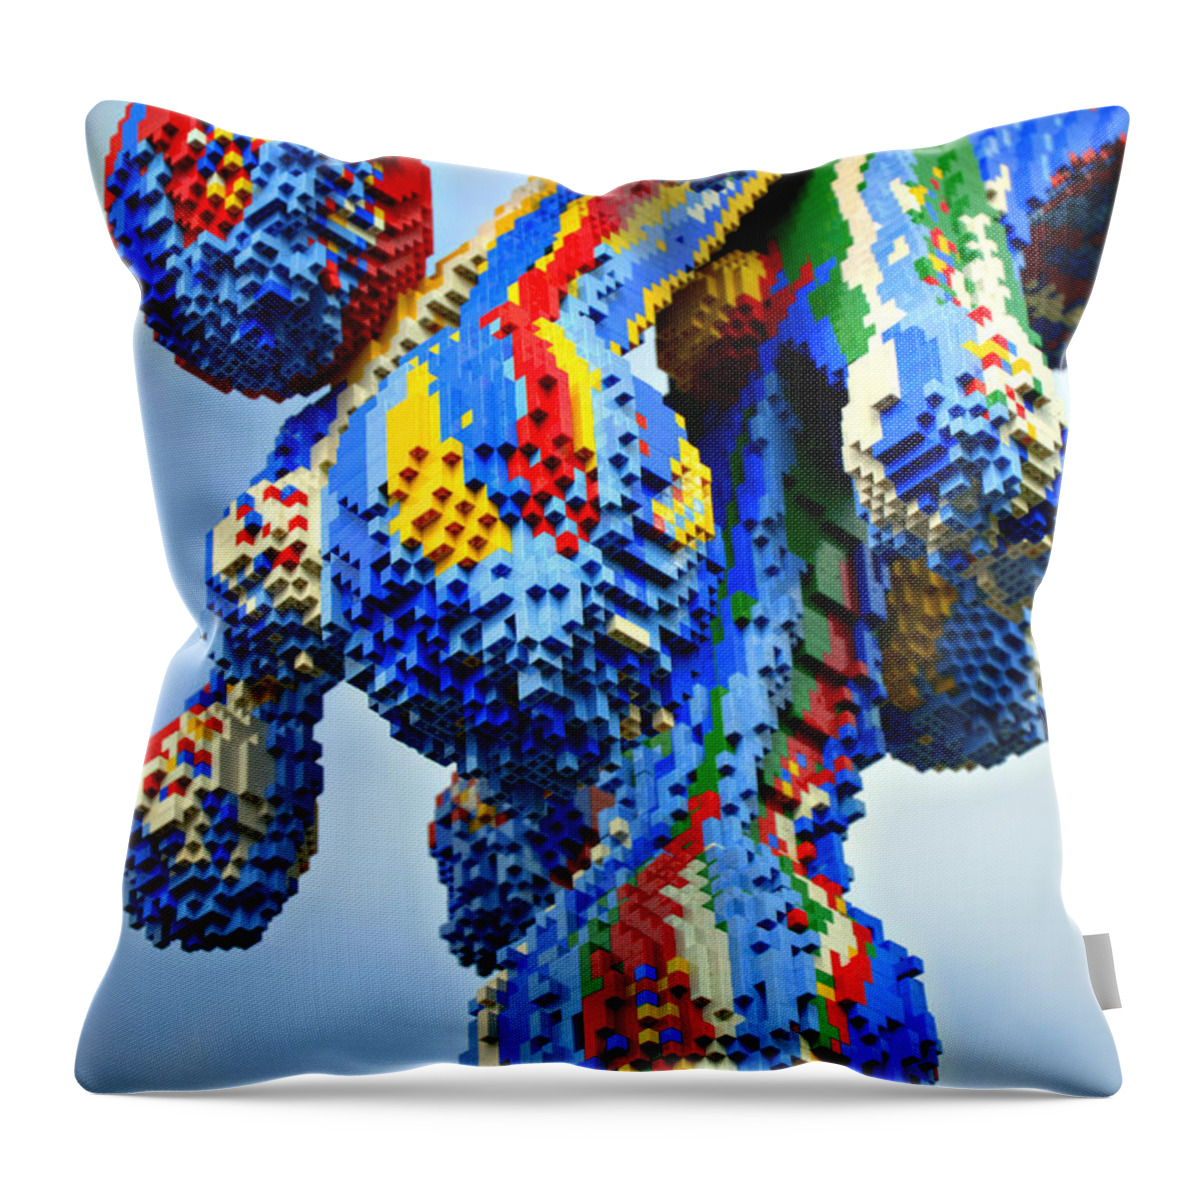 Paint Throw Pillow featuring the photograph Dripping Lego Paint by Ricky Barnard